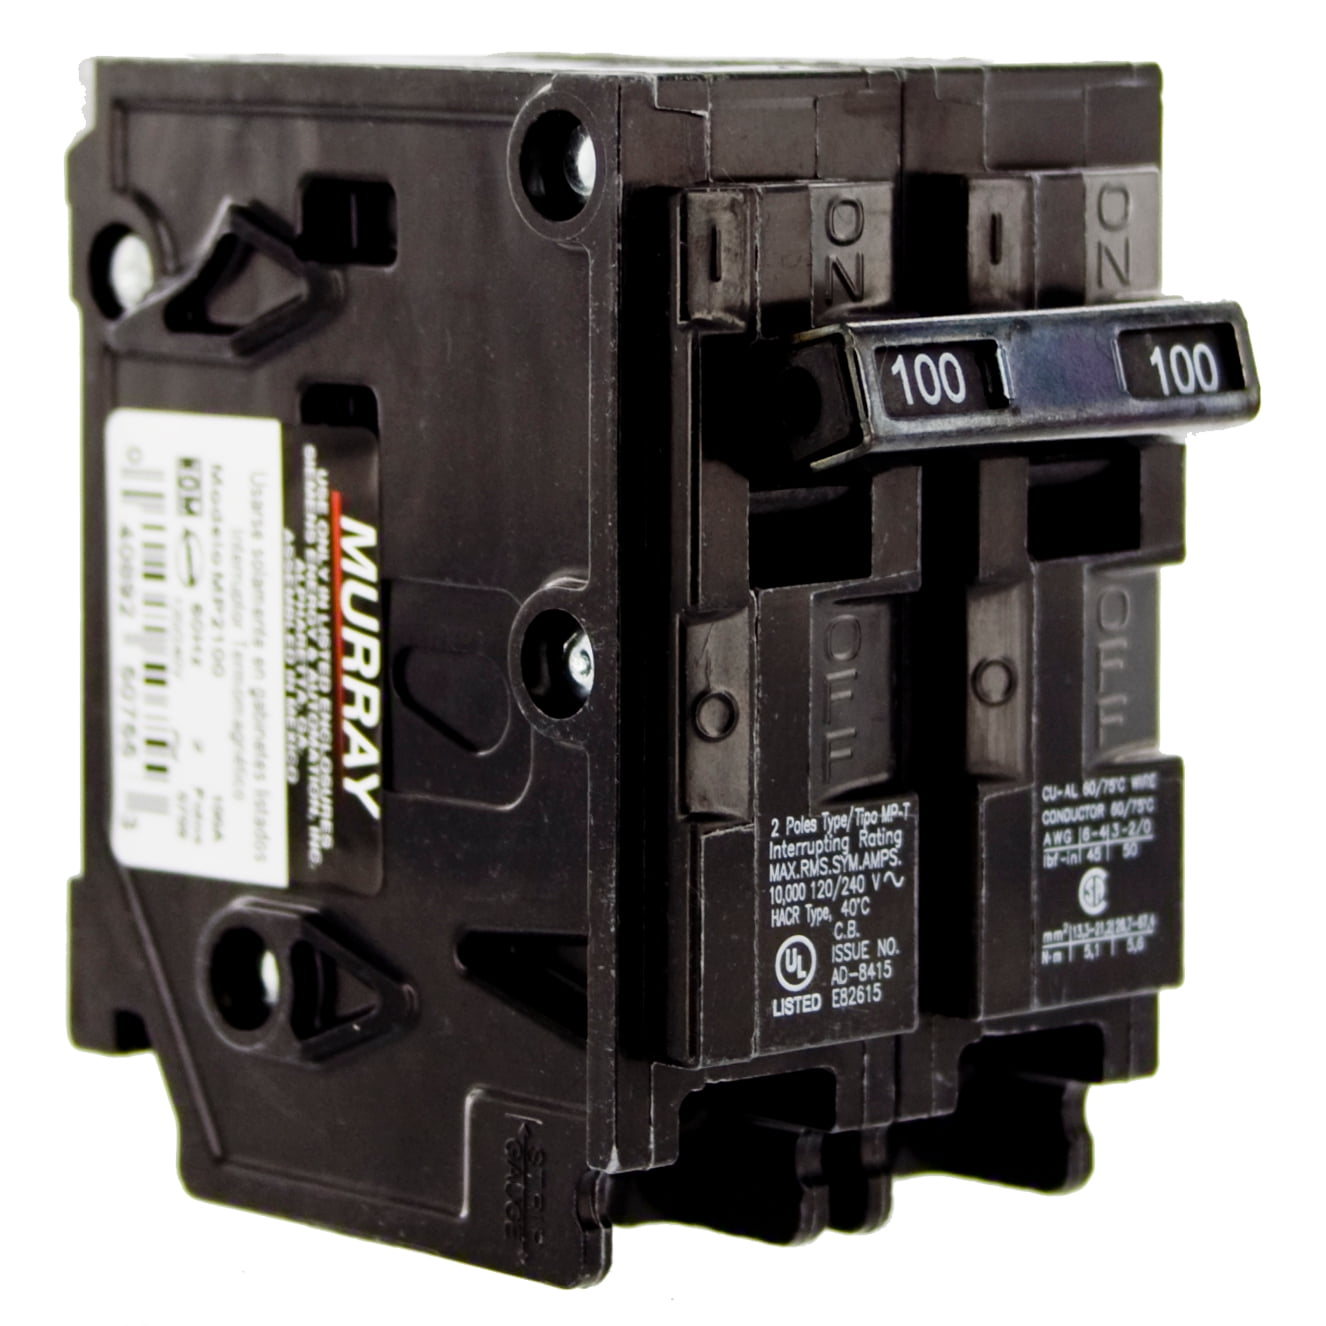 Details about   GE TQAL21100 100-Amp 2-Pole Older TQAL Circuit Breaker 100A 2P 120/240VAC 